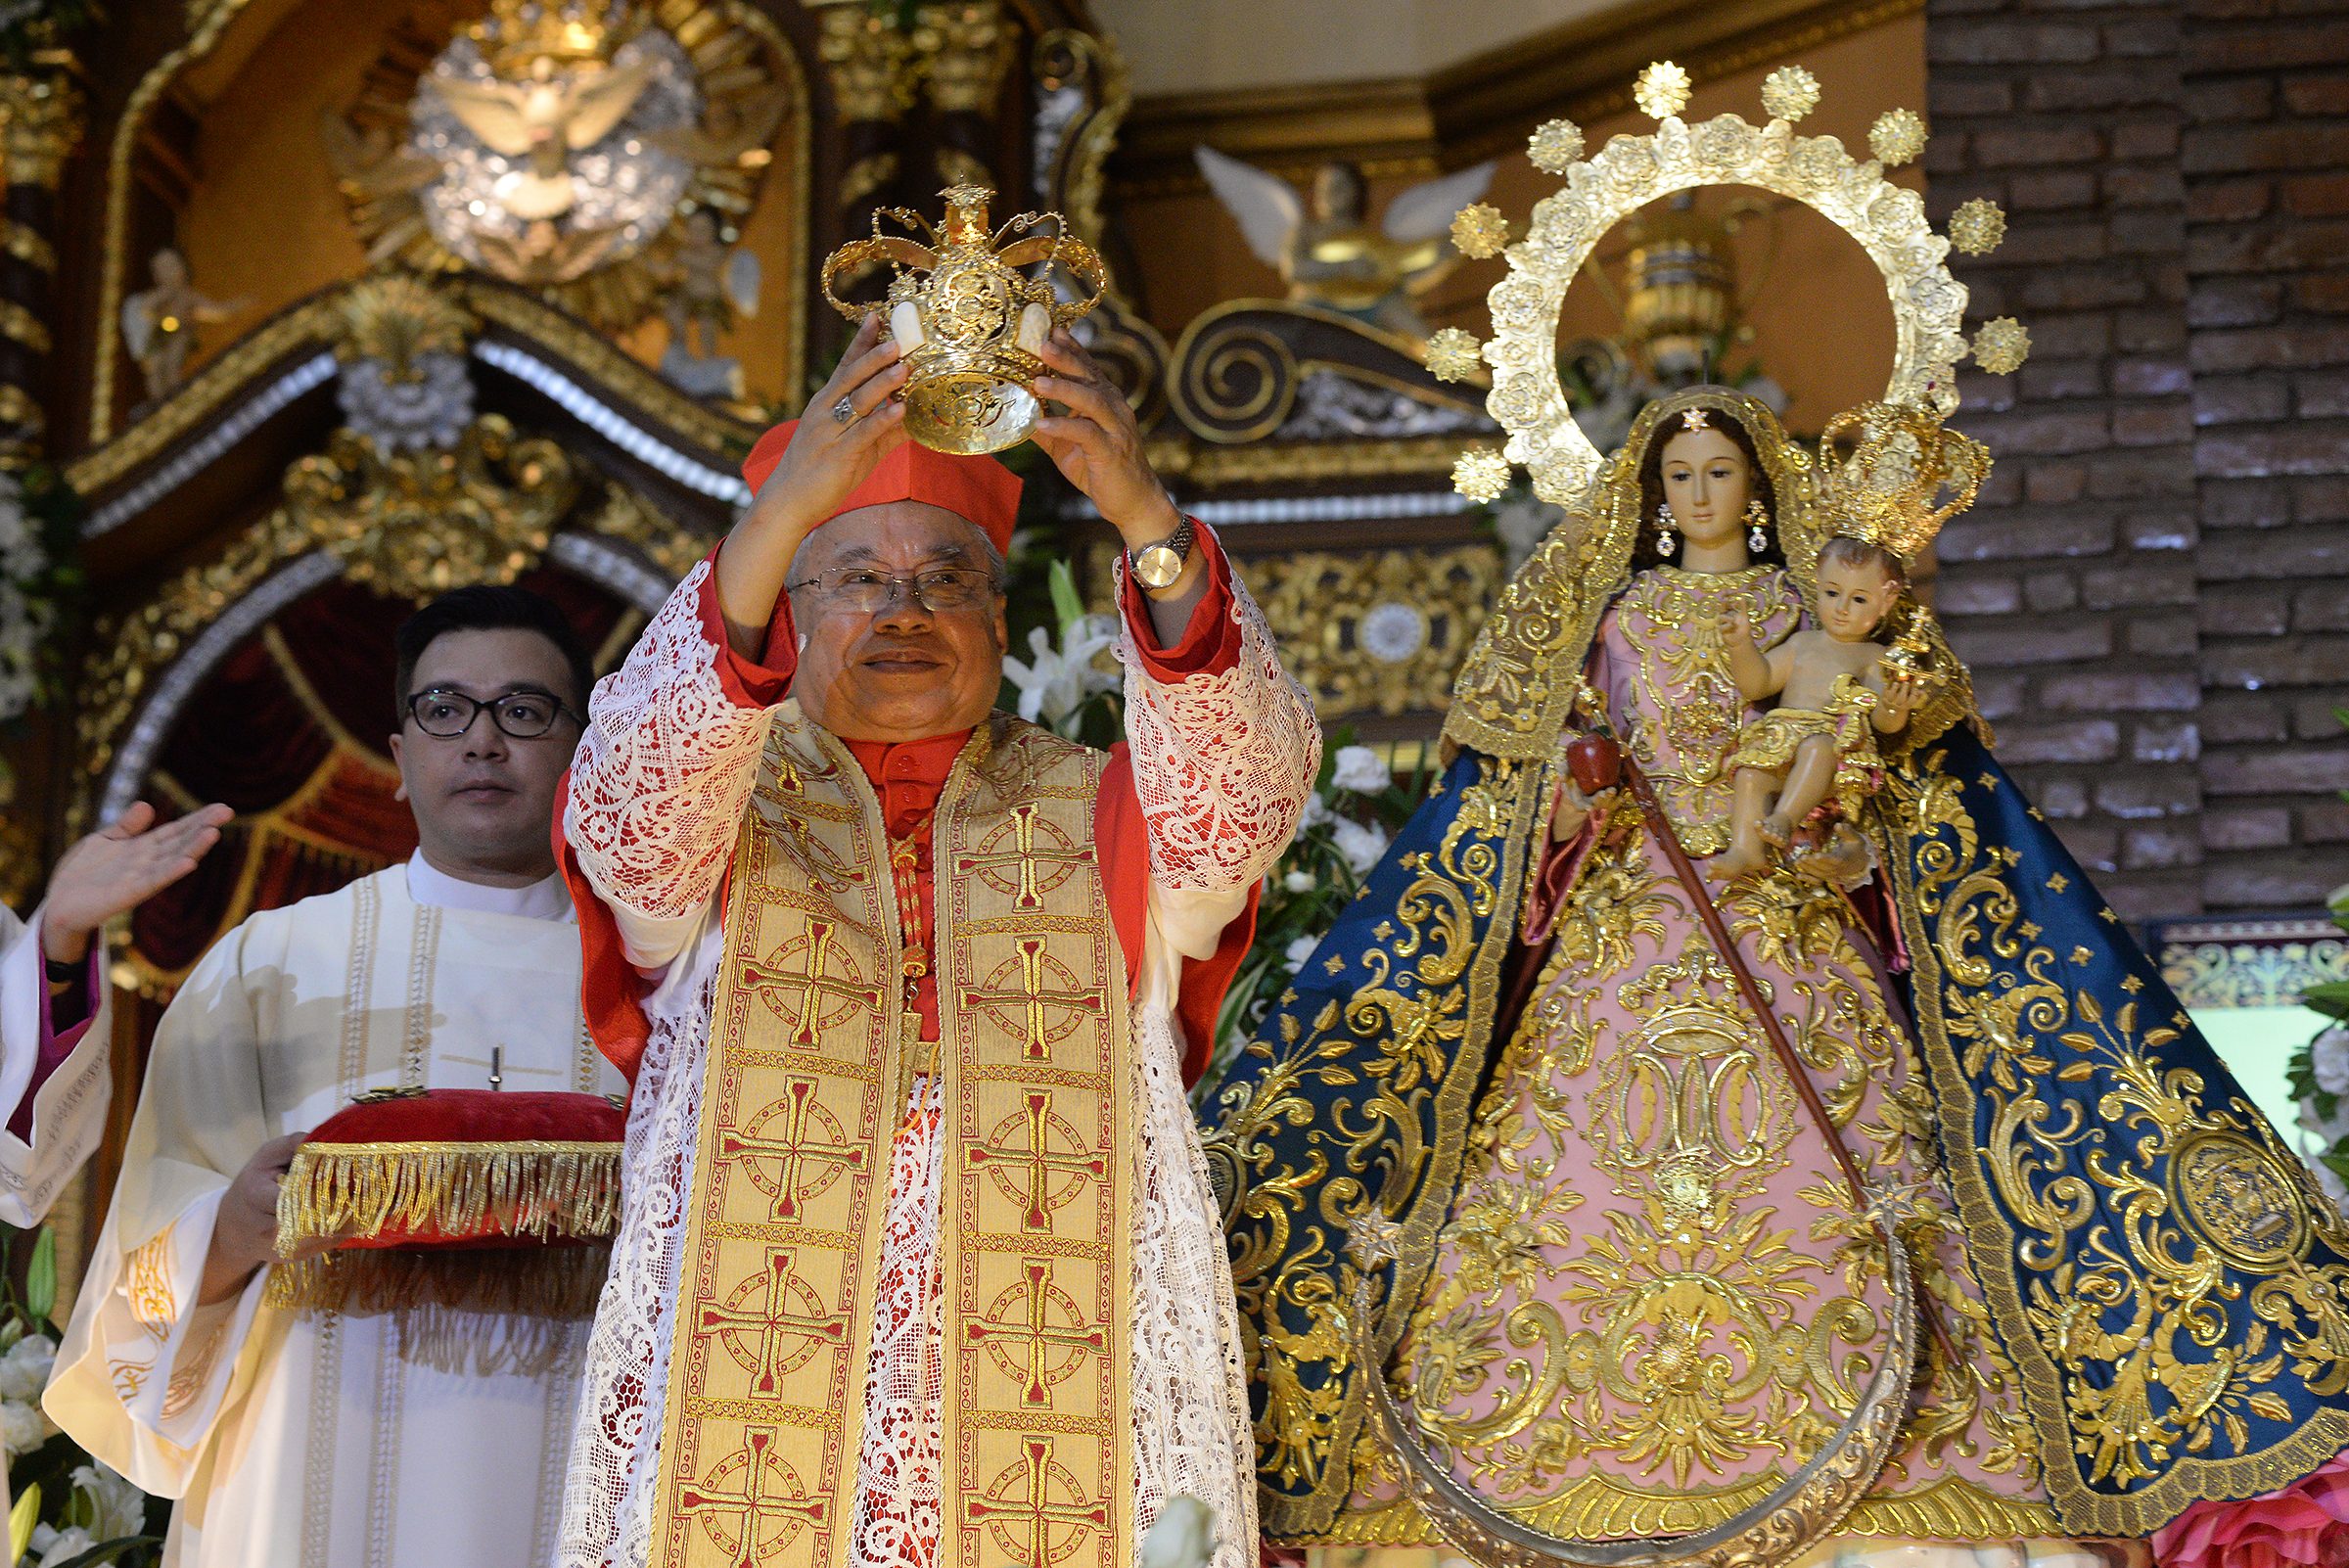 WATCH: Marian image in San Mateo crowned by papal mandate